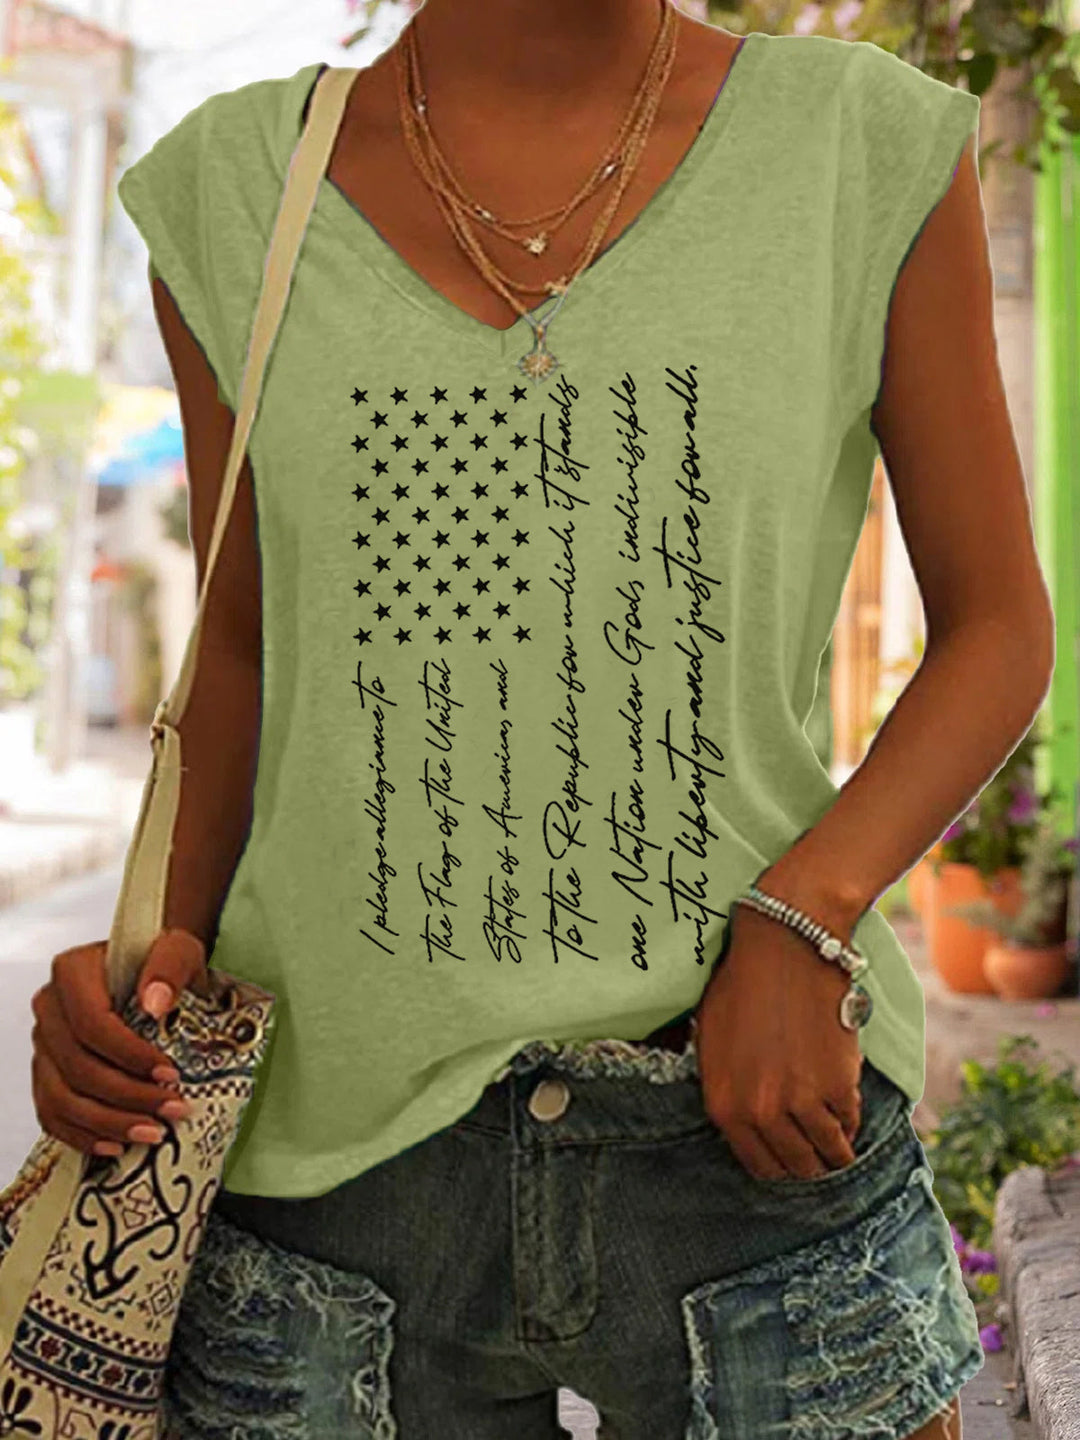 USA Flag With Pledge of Allegiance T-Shirt